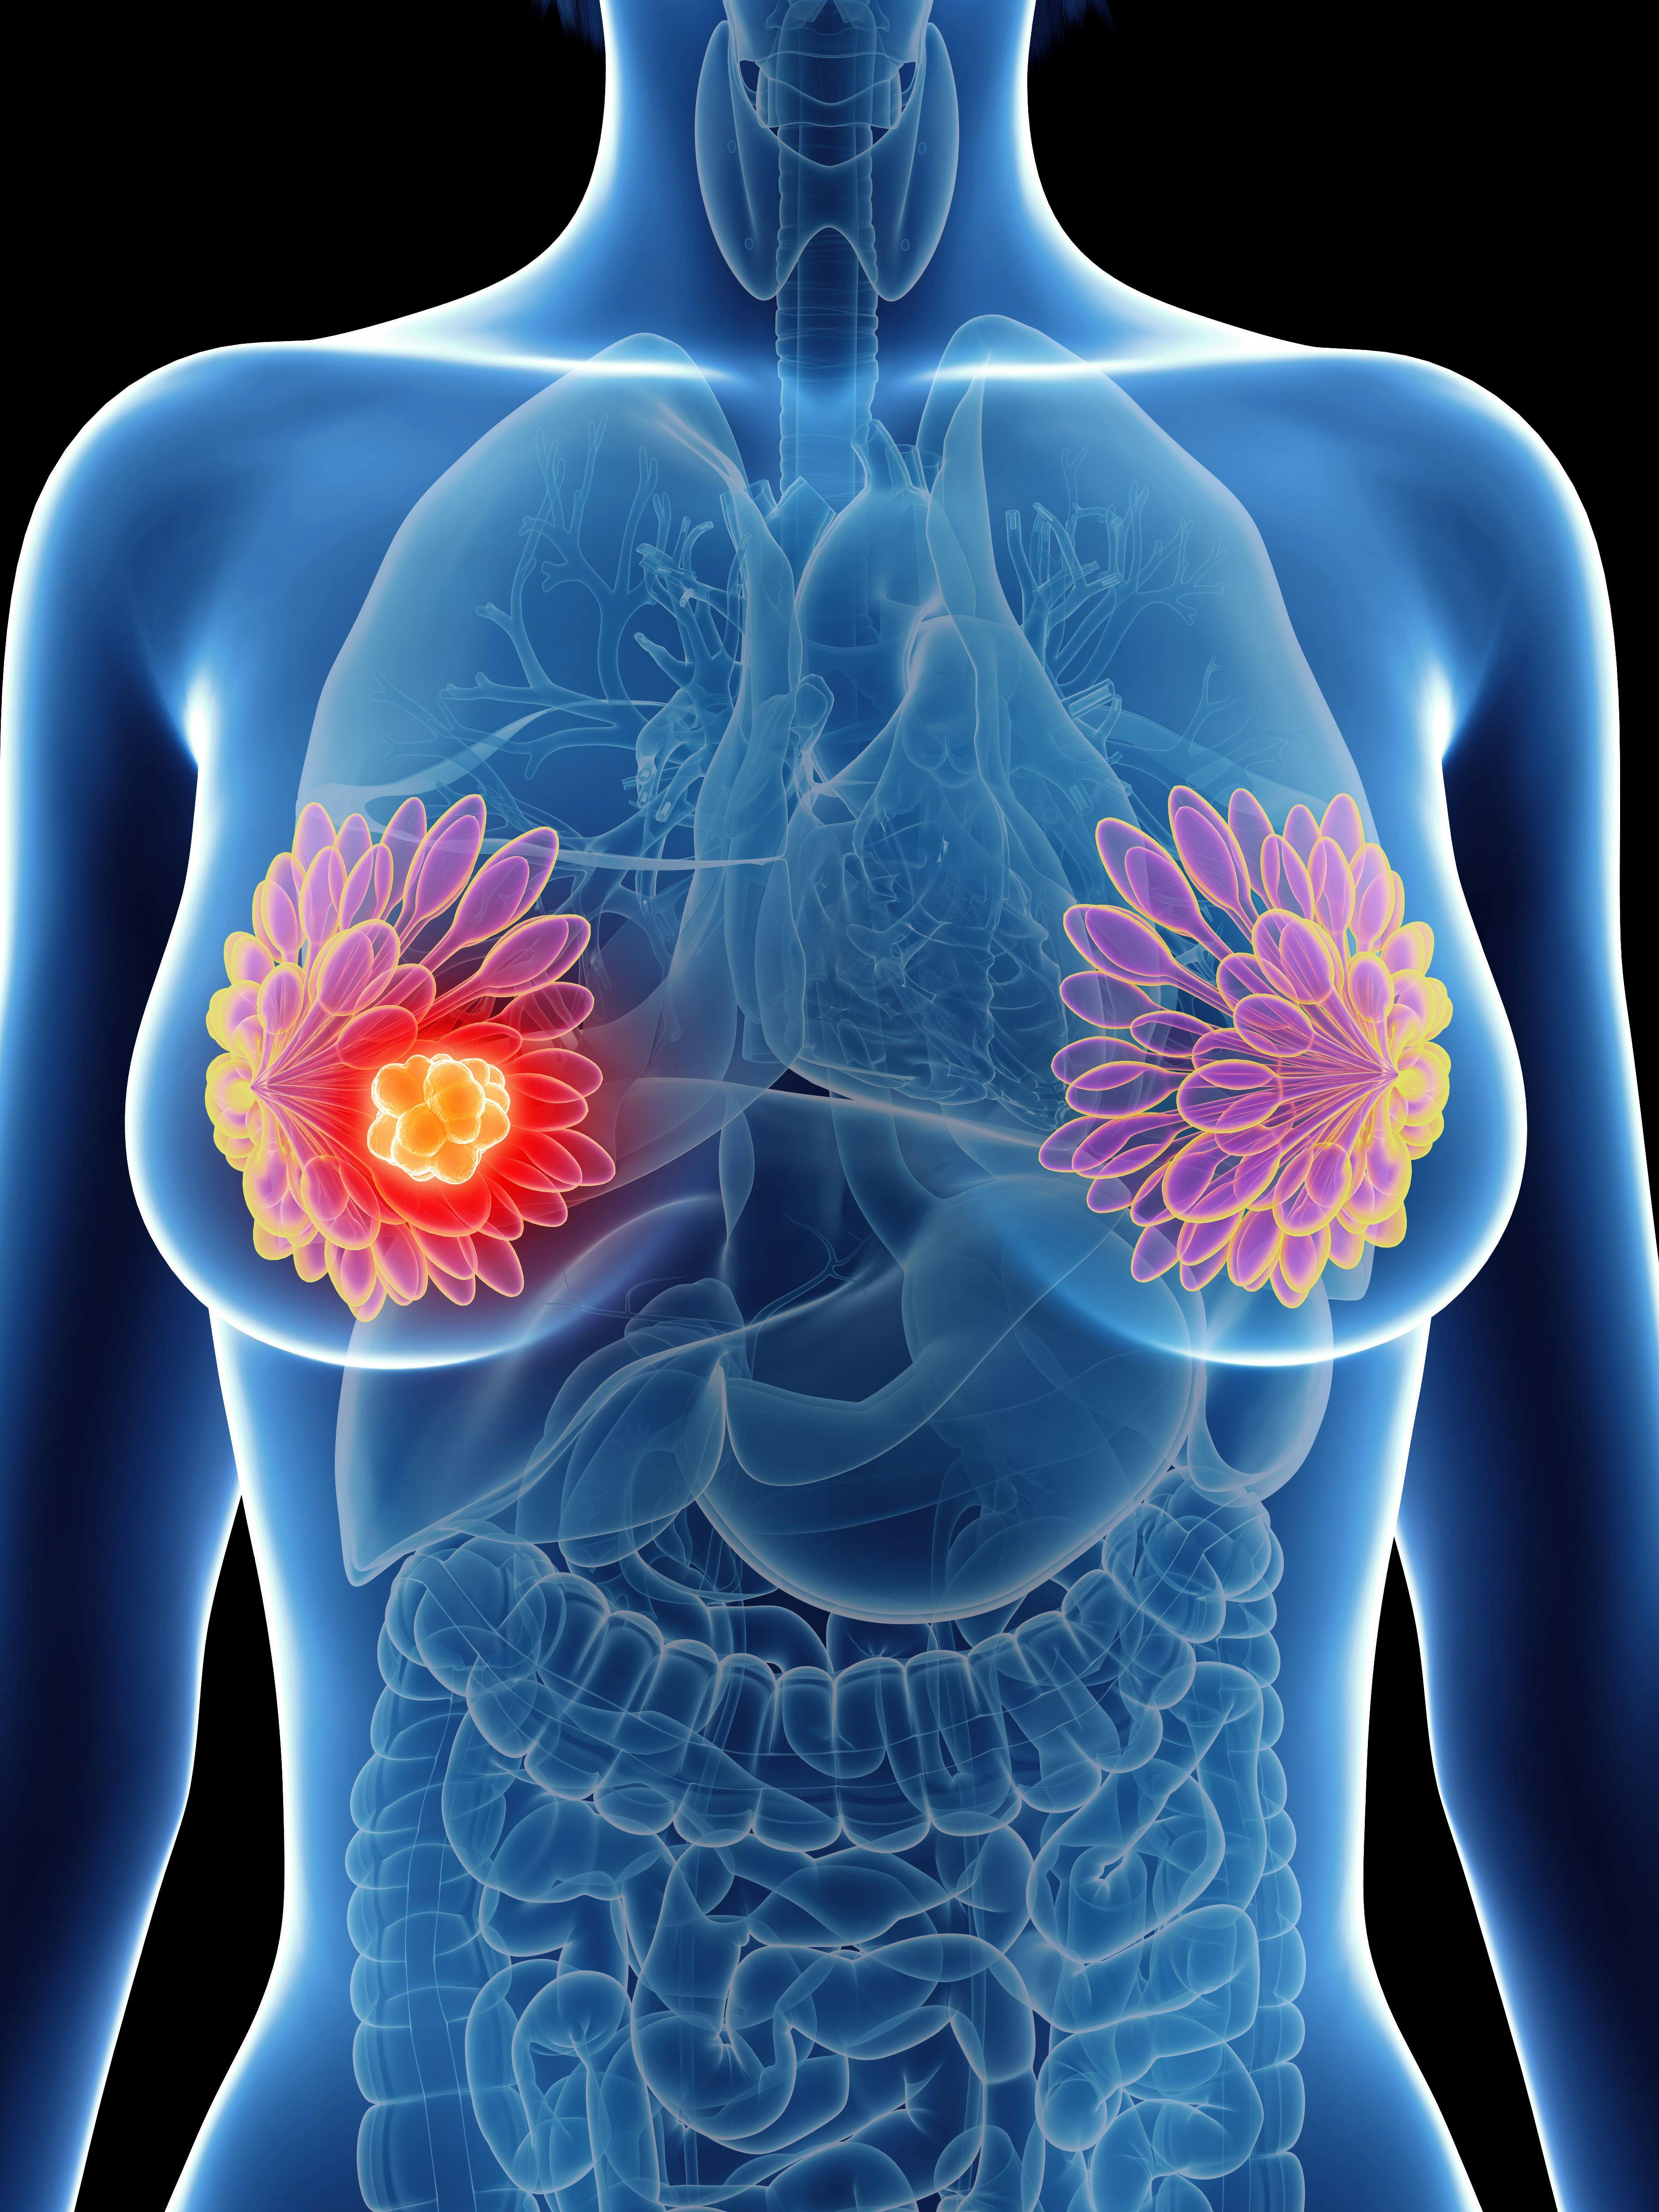 Adjuvant/Neoadjuvant Chemotherapy Is Not Associated With Complications or Patient-Reported Outcomes Among Breast Cancer Survivors